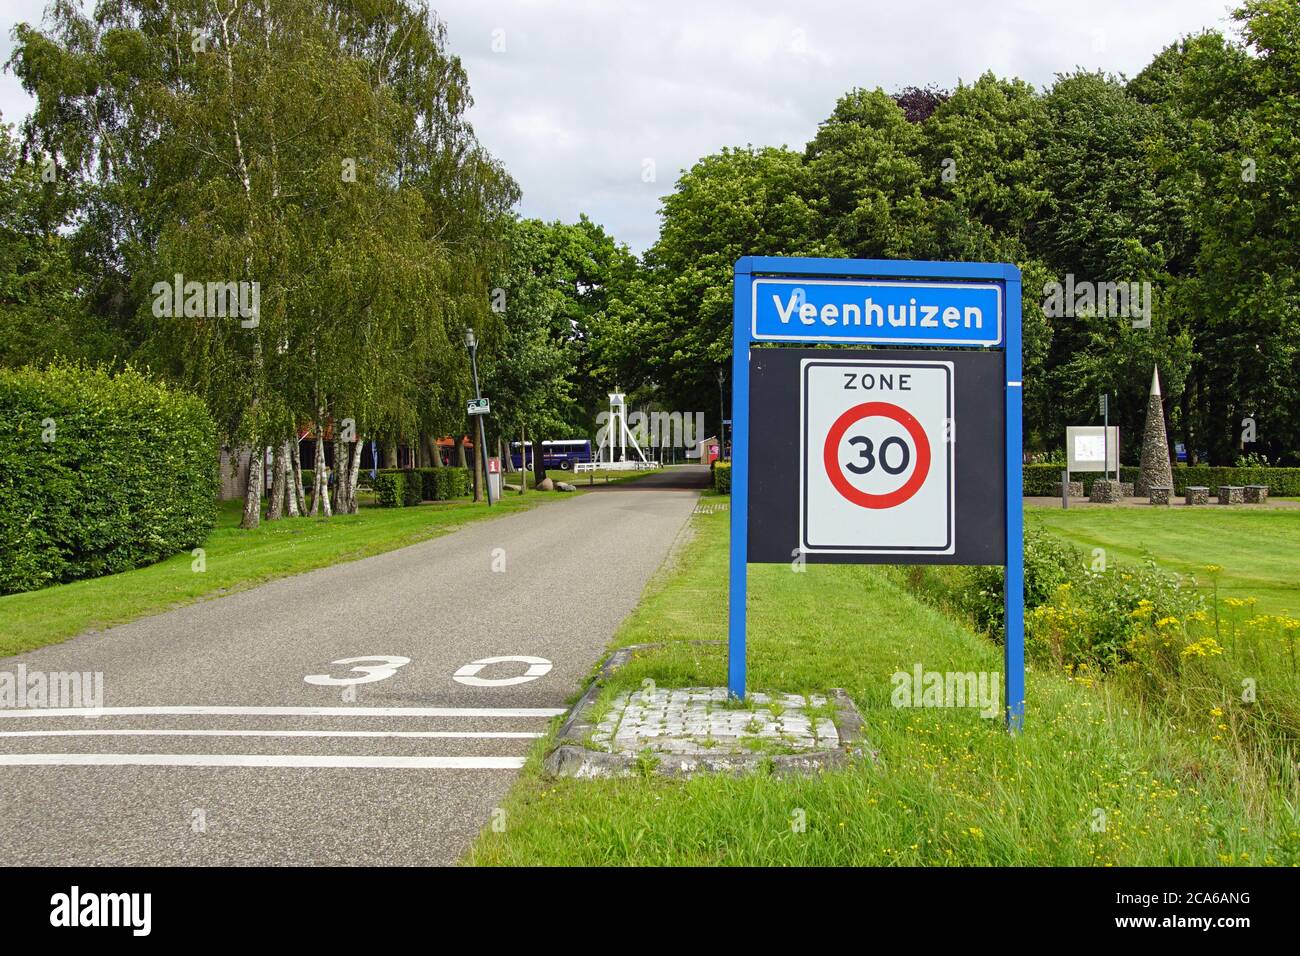 Veenhuizen, the Netherlands - July 29, 2020: City entrance sign of the Dutch town of Veenhuizen. Stock Photo